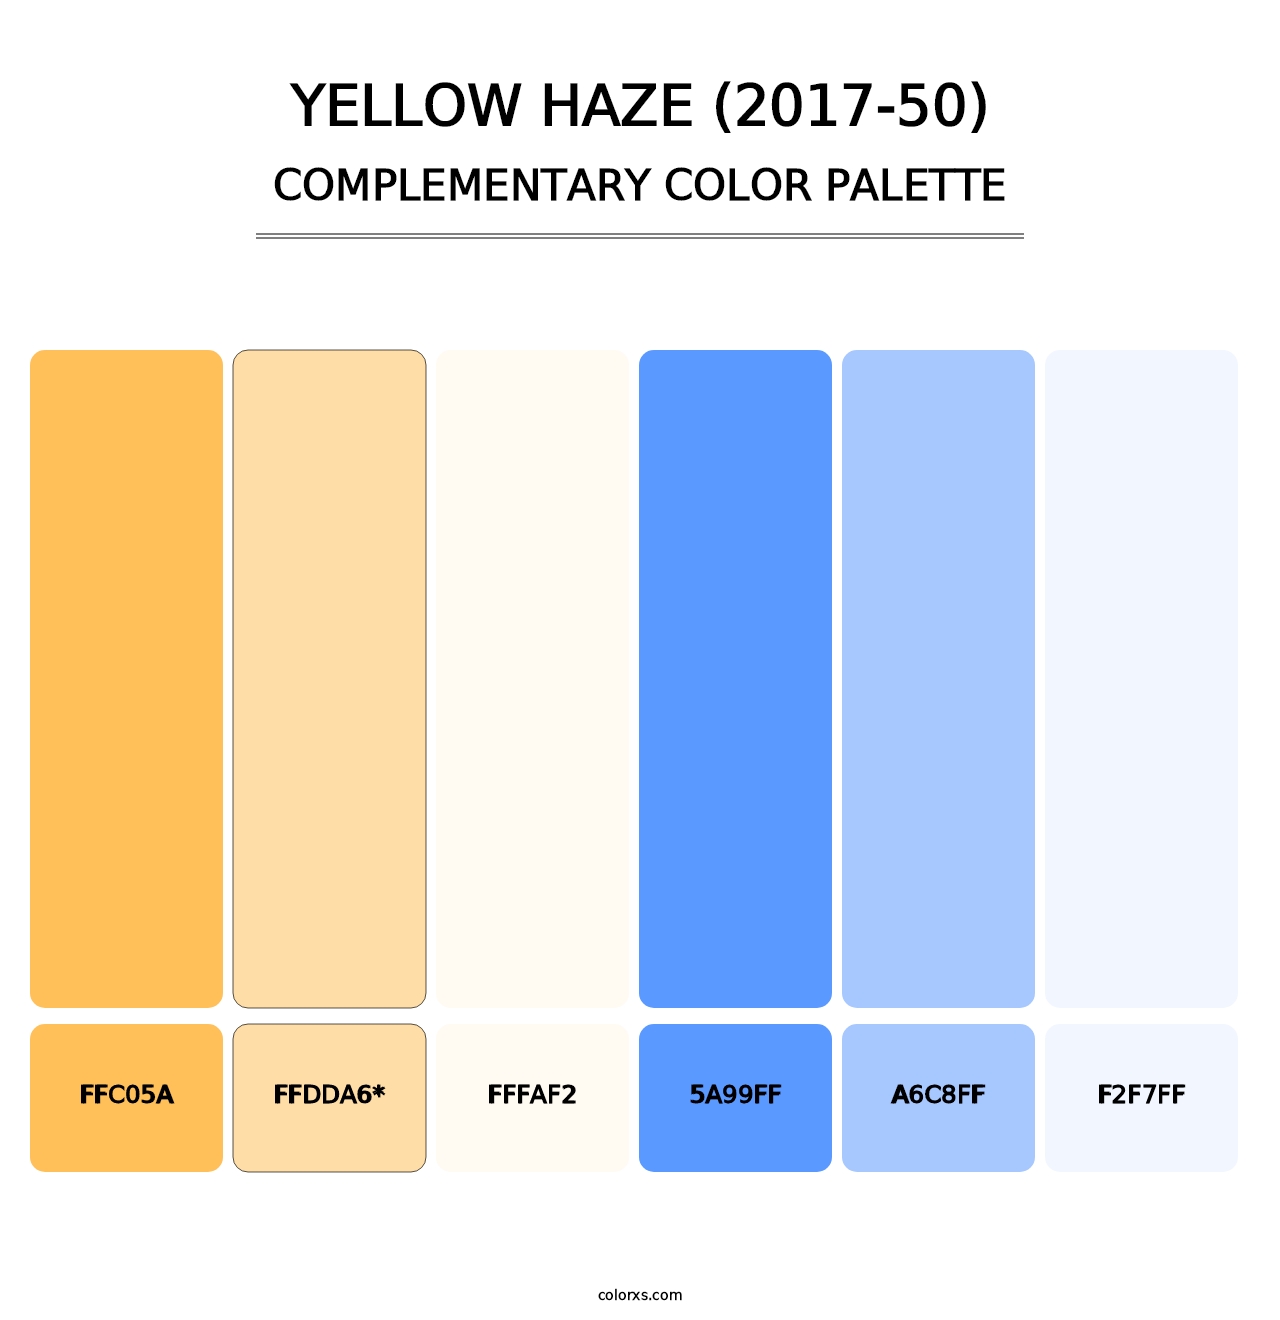 Yellow Haze (2017-50) - Complementary Color Palette